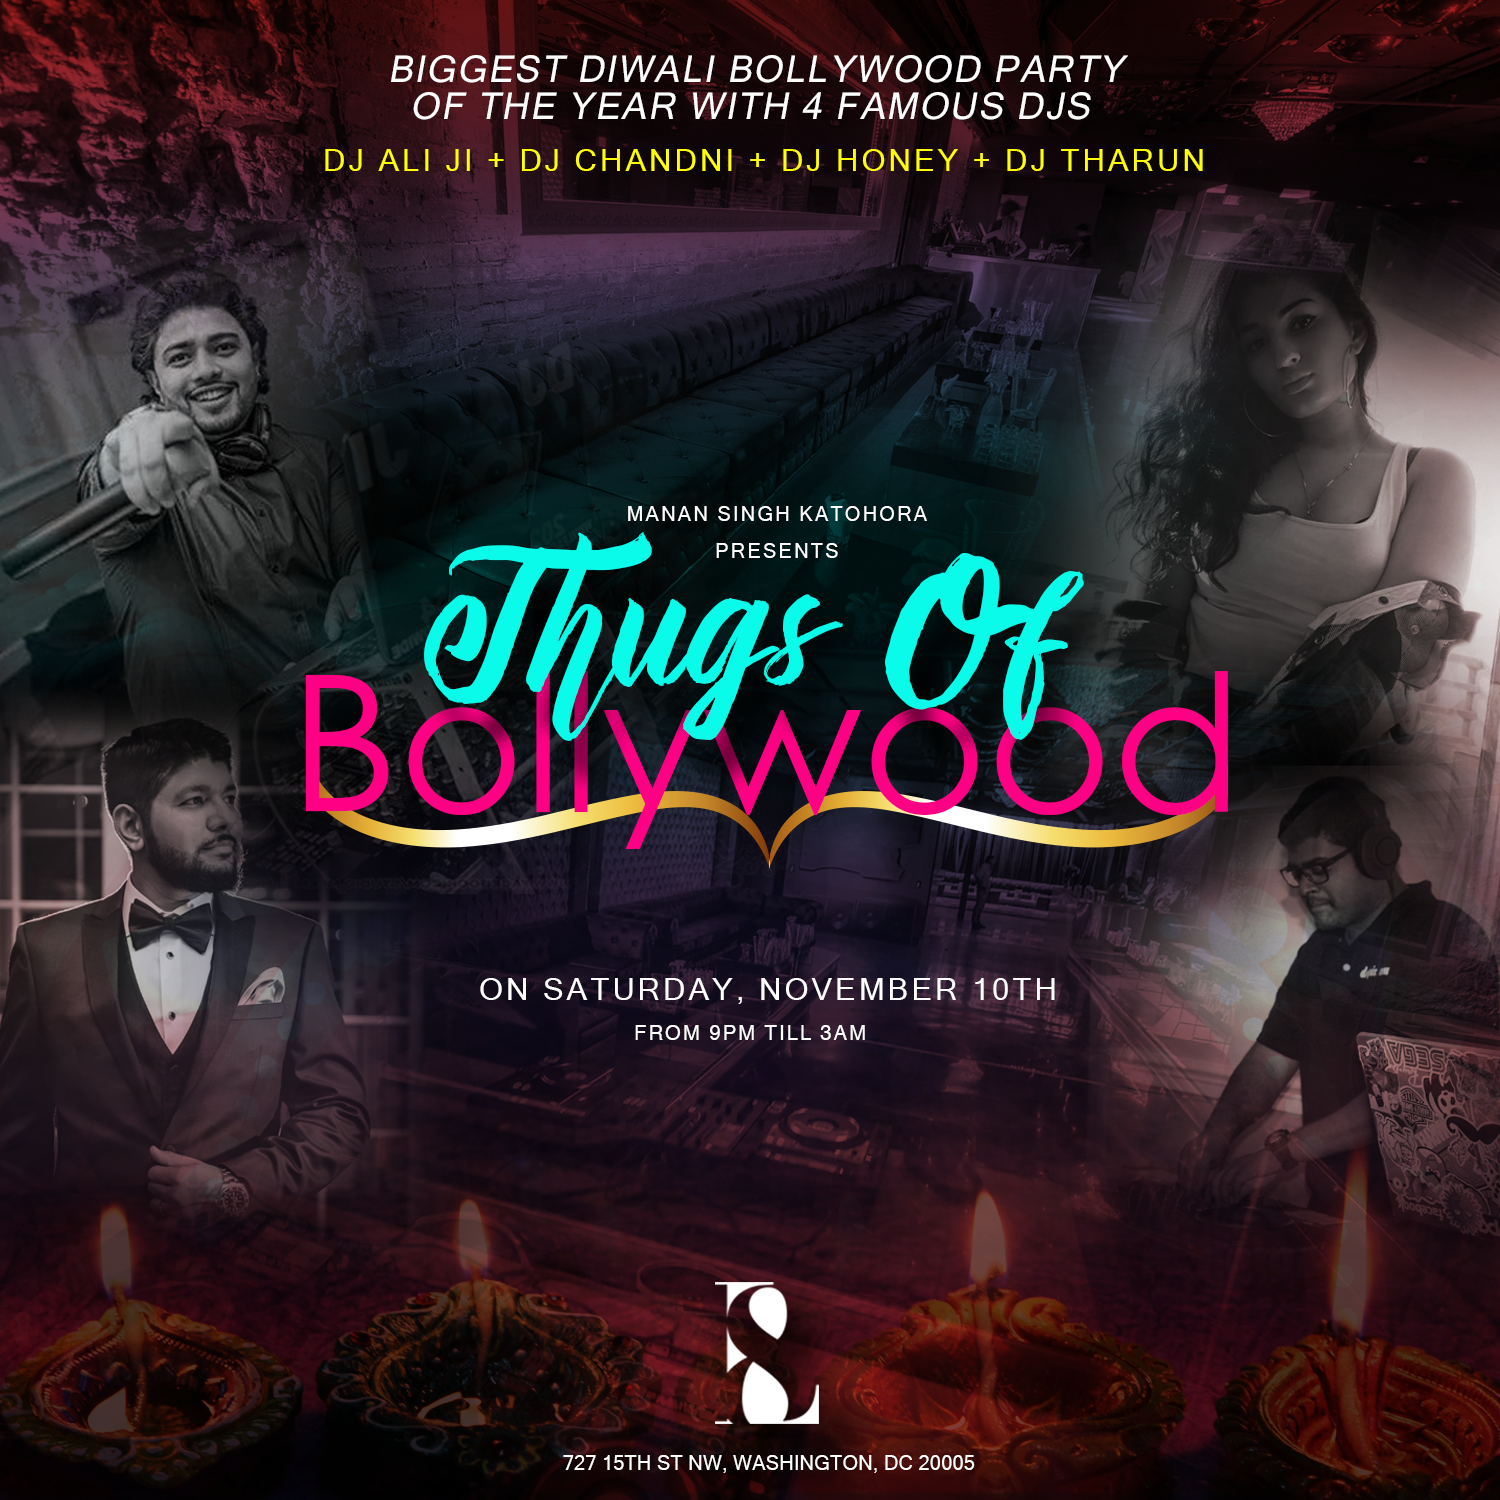 THUGS OF BOLLYWOOD - Biggest DIWALI Party of the Year with 4 Celebrity DJs